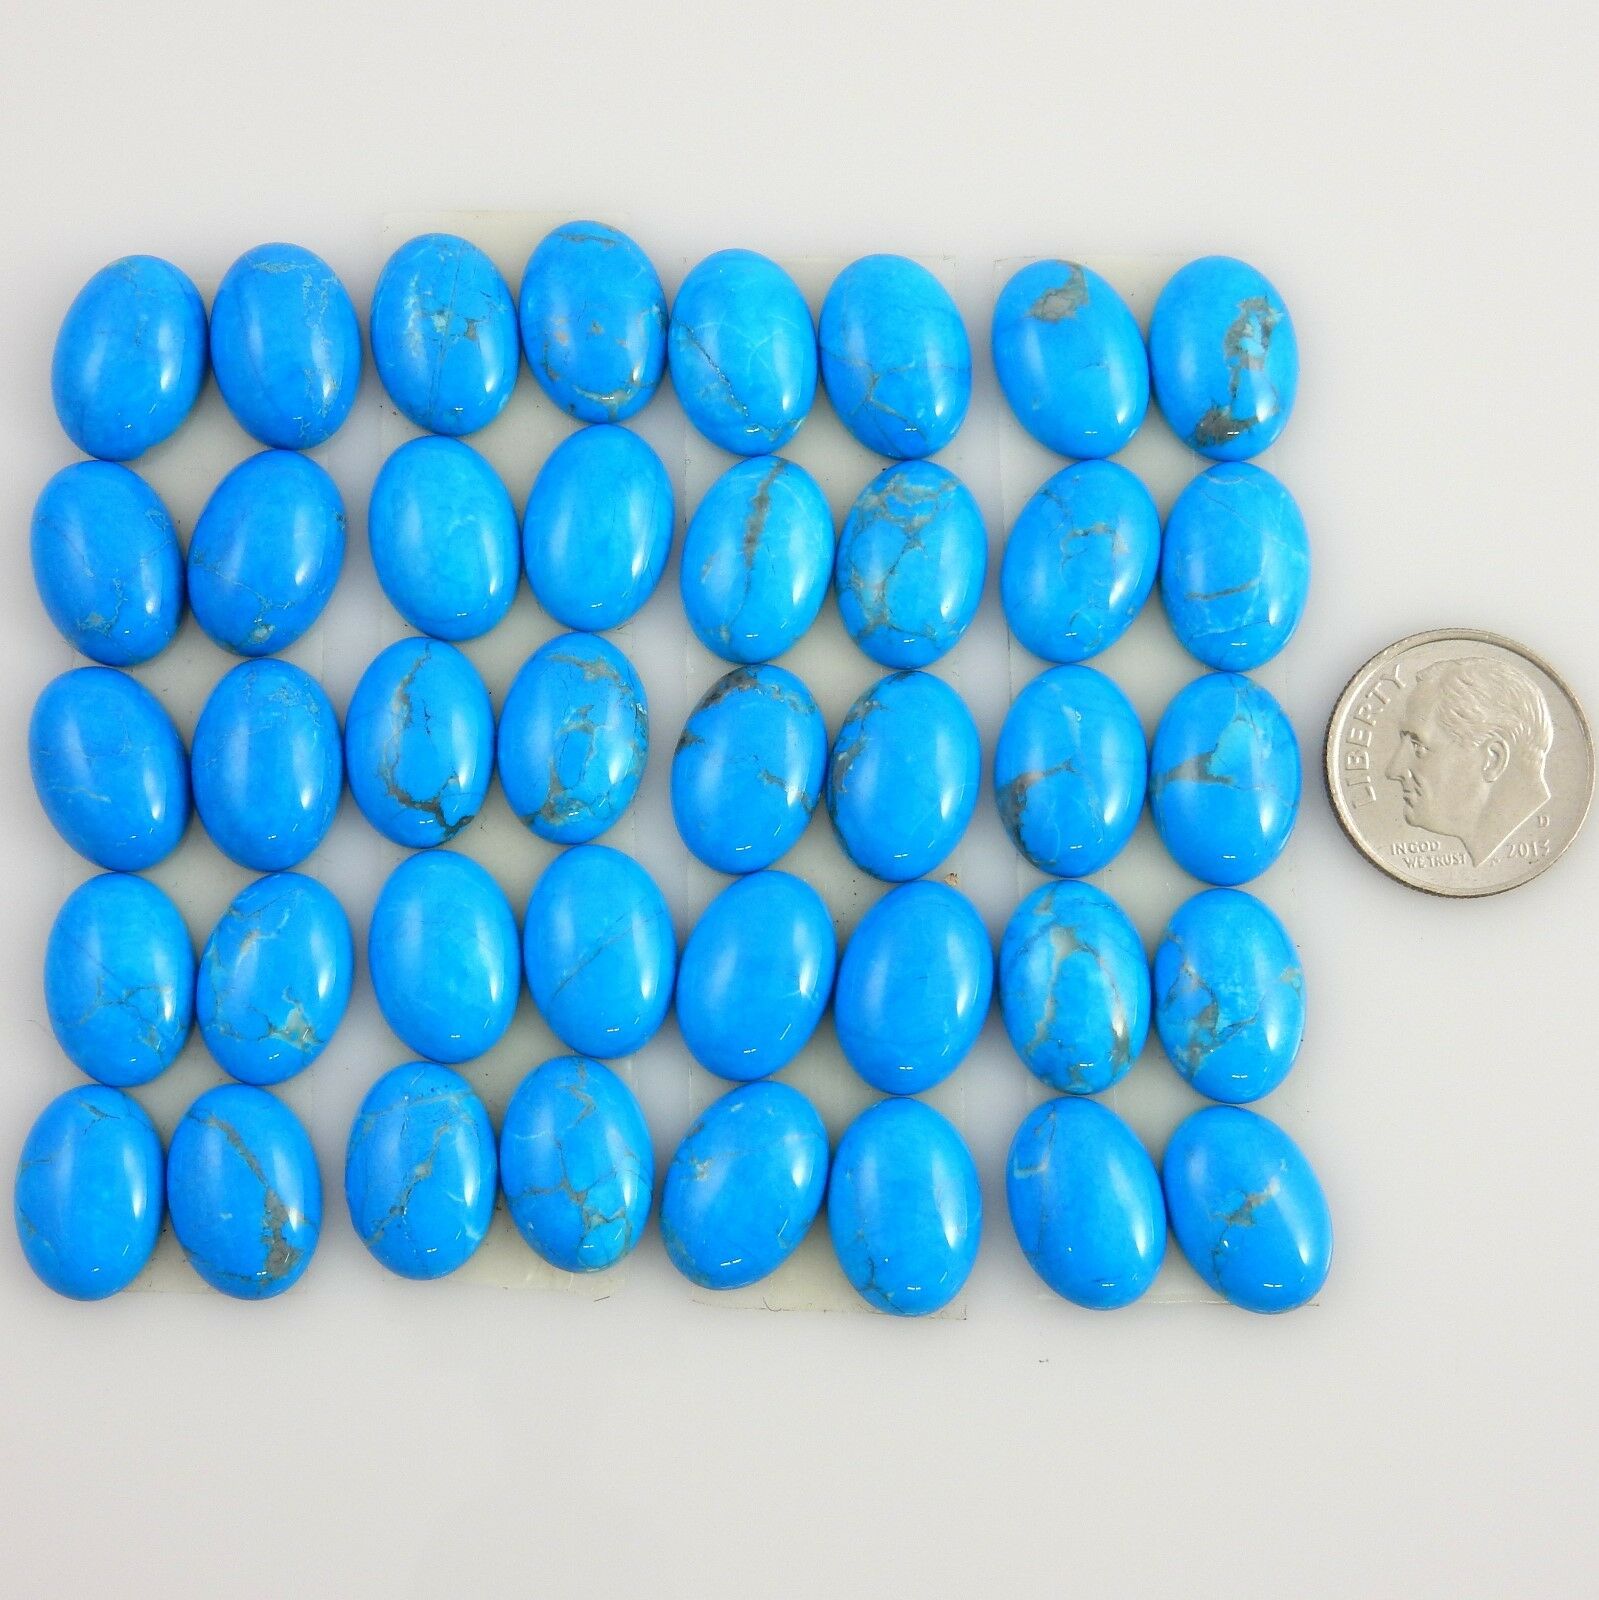 180 Carats Natural Howlite Gemstones 10x14mm Oval Cabochons Cabs Parcel